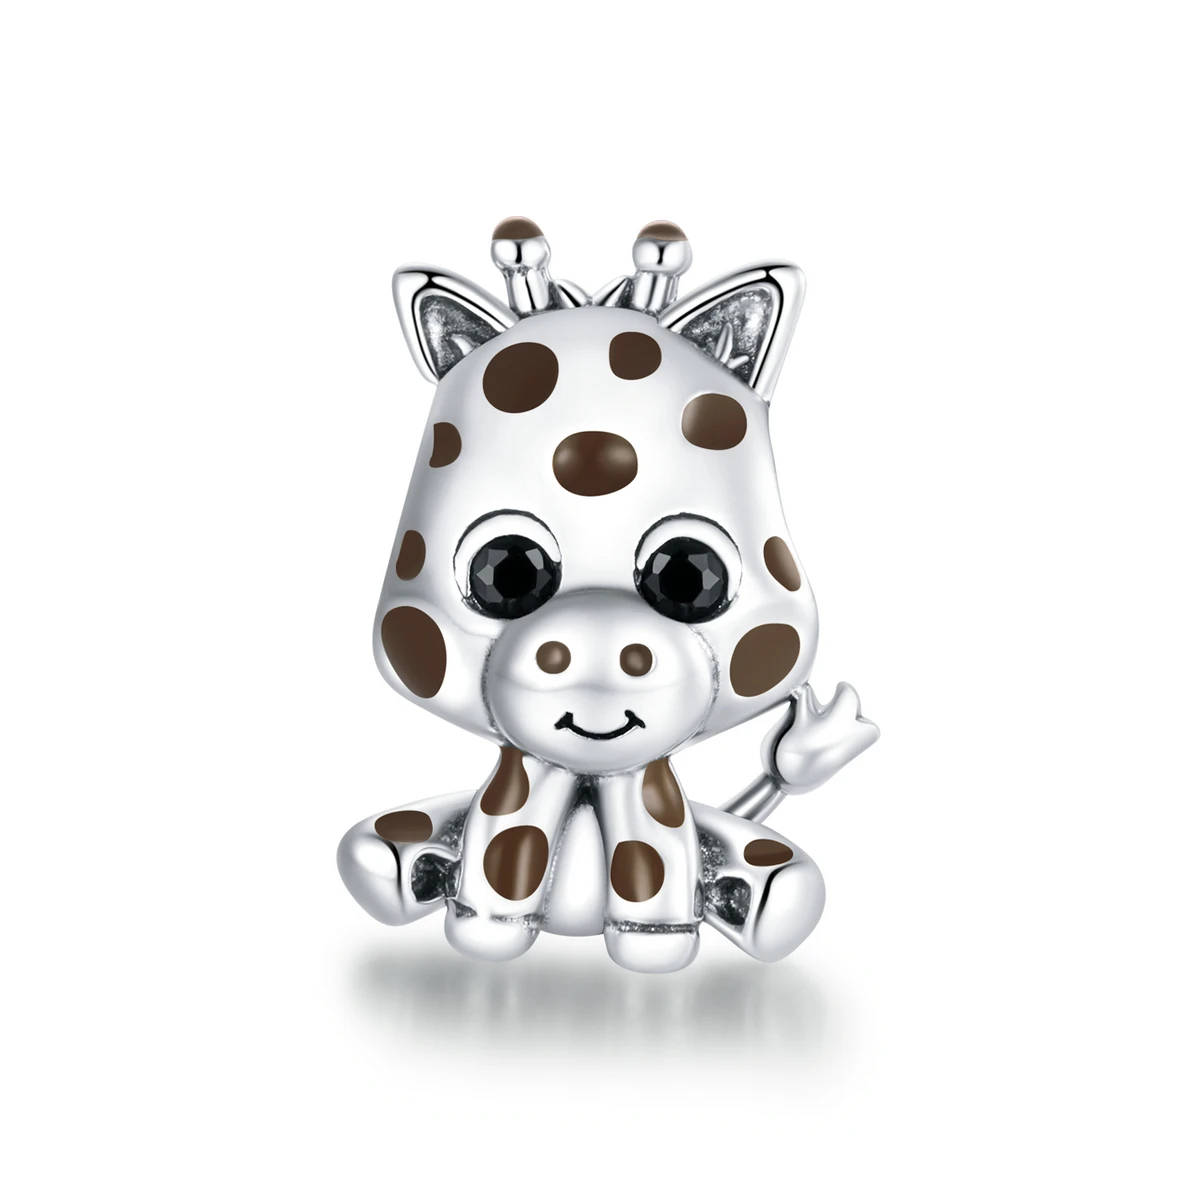 Scc1691 Lovely Baby Giraffe Charms Silver 925 Animal Jewelry Charm - Buy Silver  Charms Fir Bangles,Bracelet Pendant Charms Silver,Animal Charms Silver  Product on 